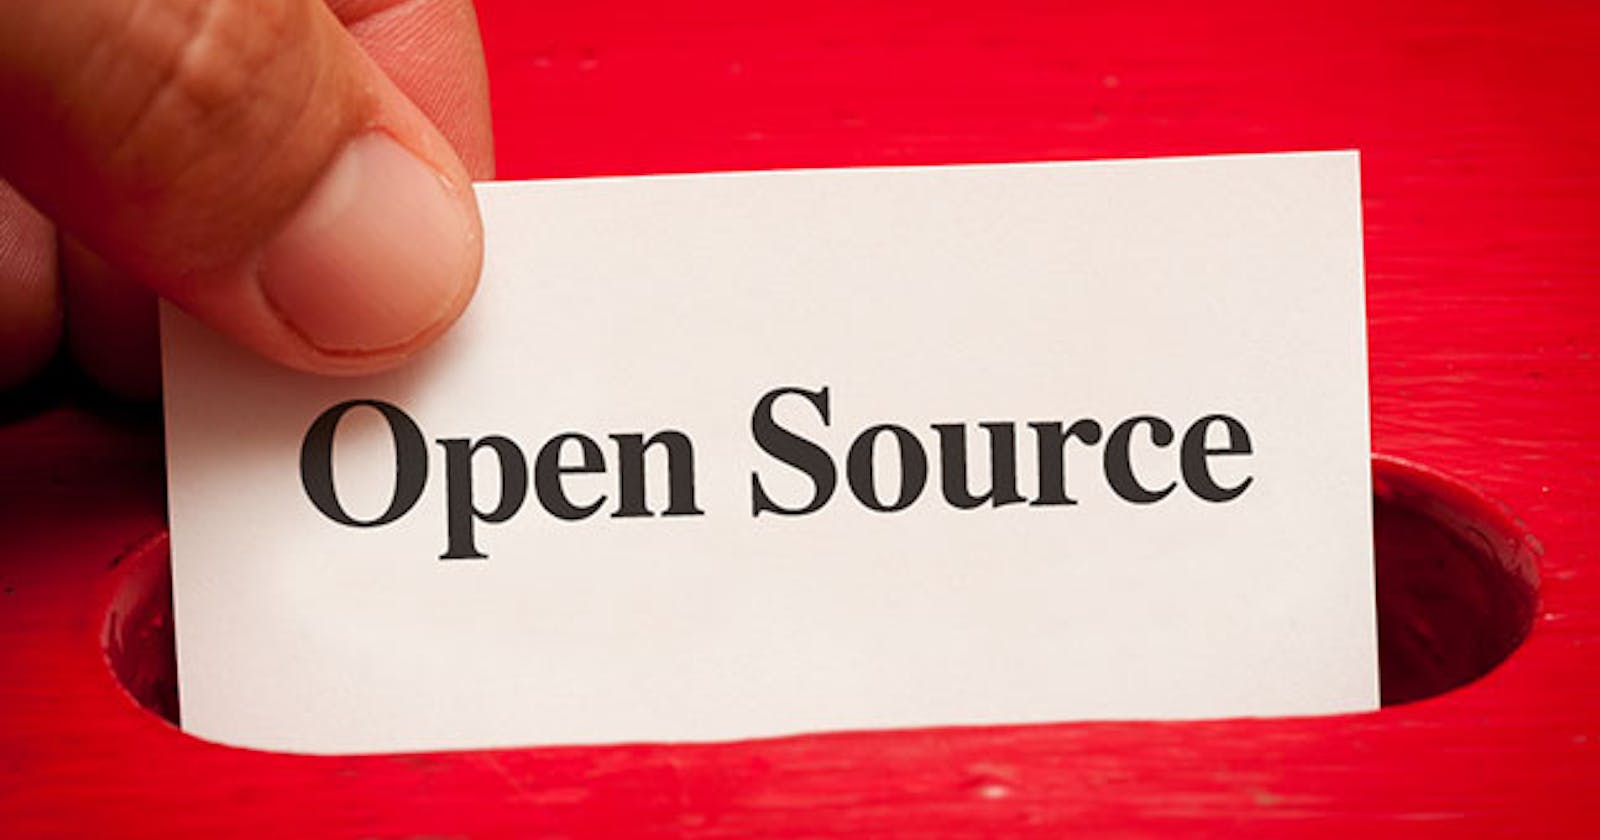 What is an open source project and how can a beginner contribute to it?